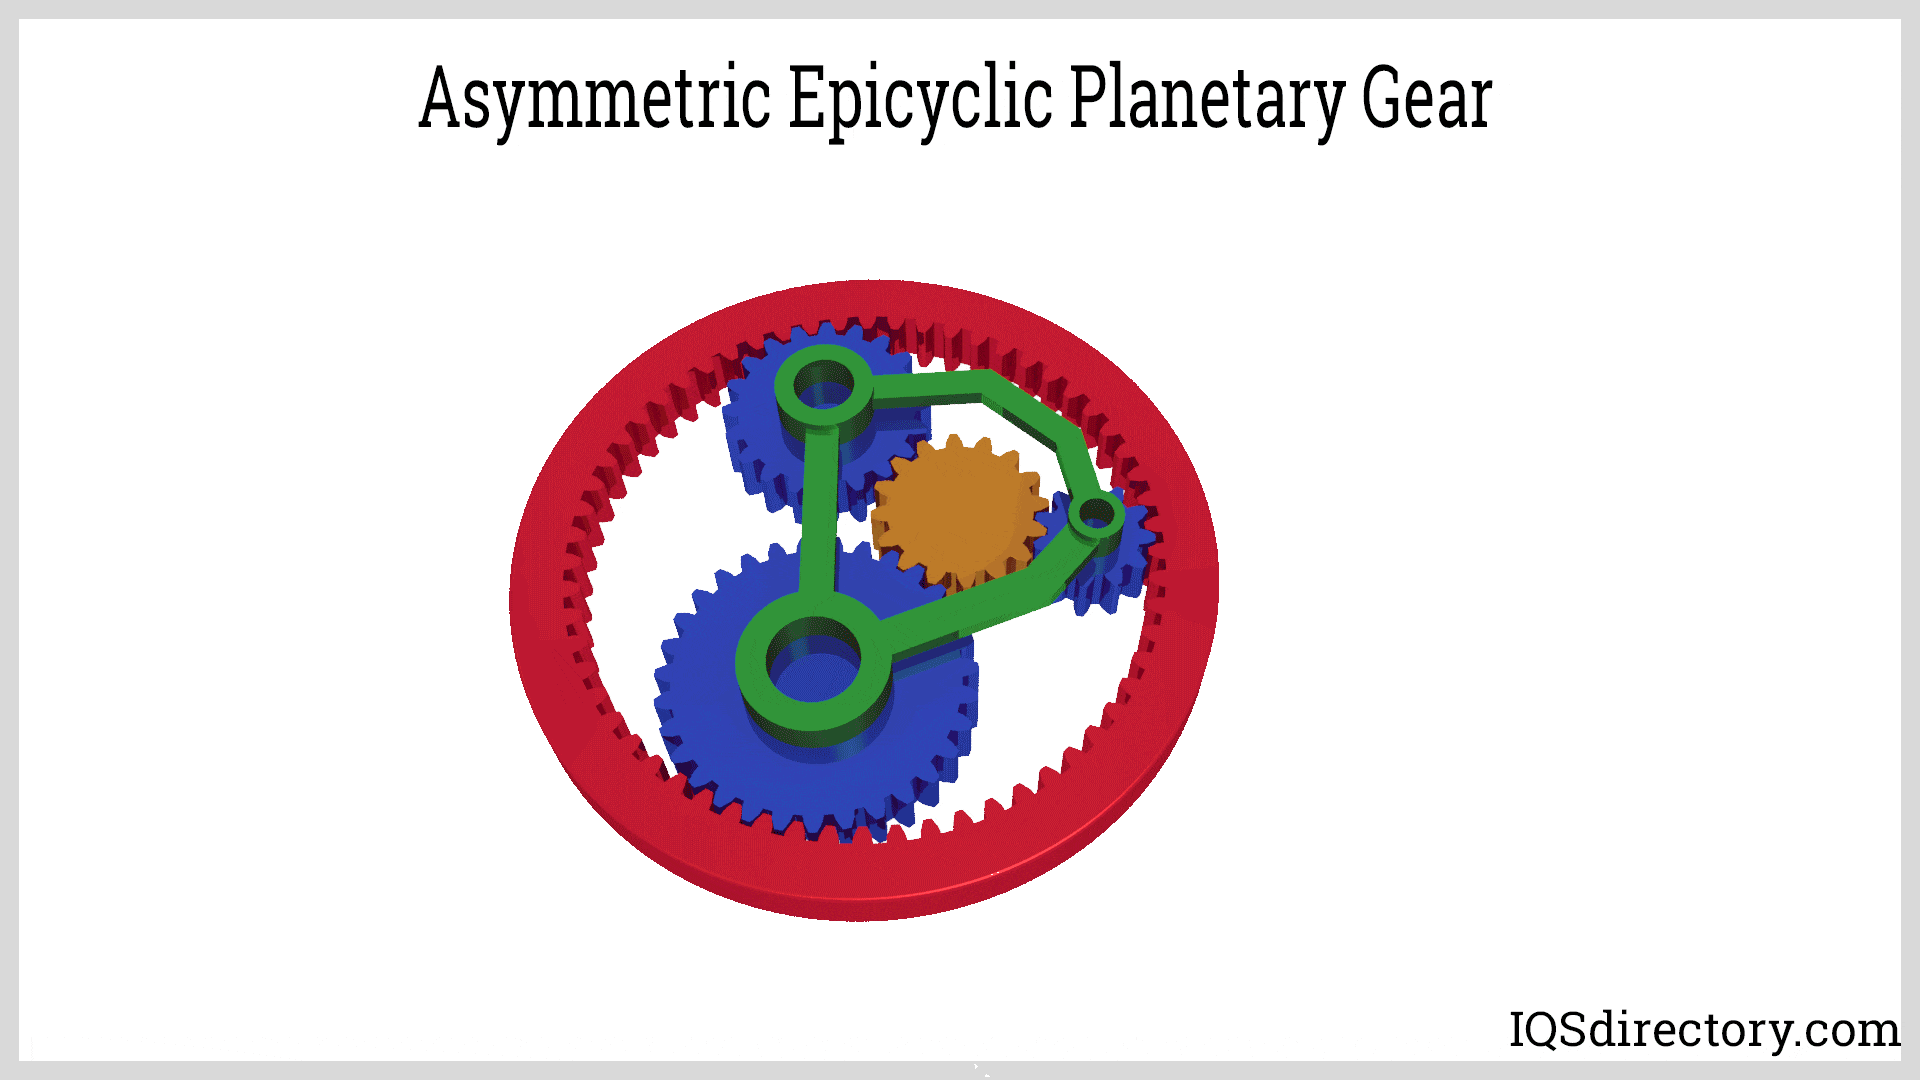 Planetary Gears: What Are They? How Do They Work? Types and Uses